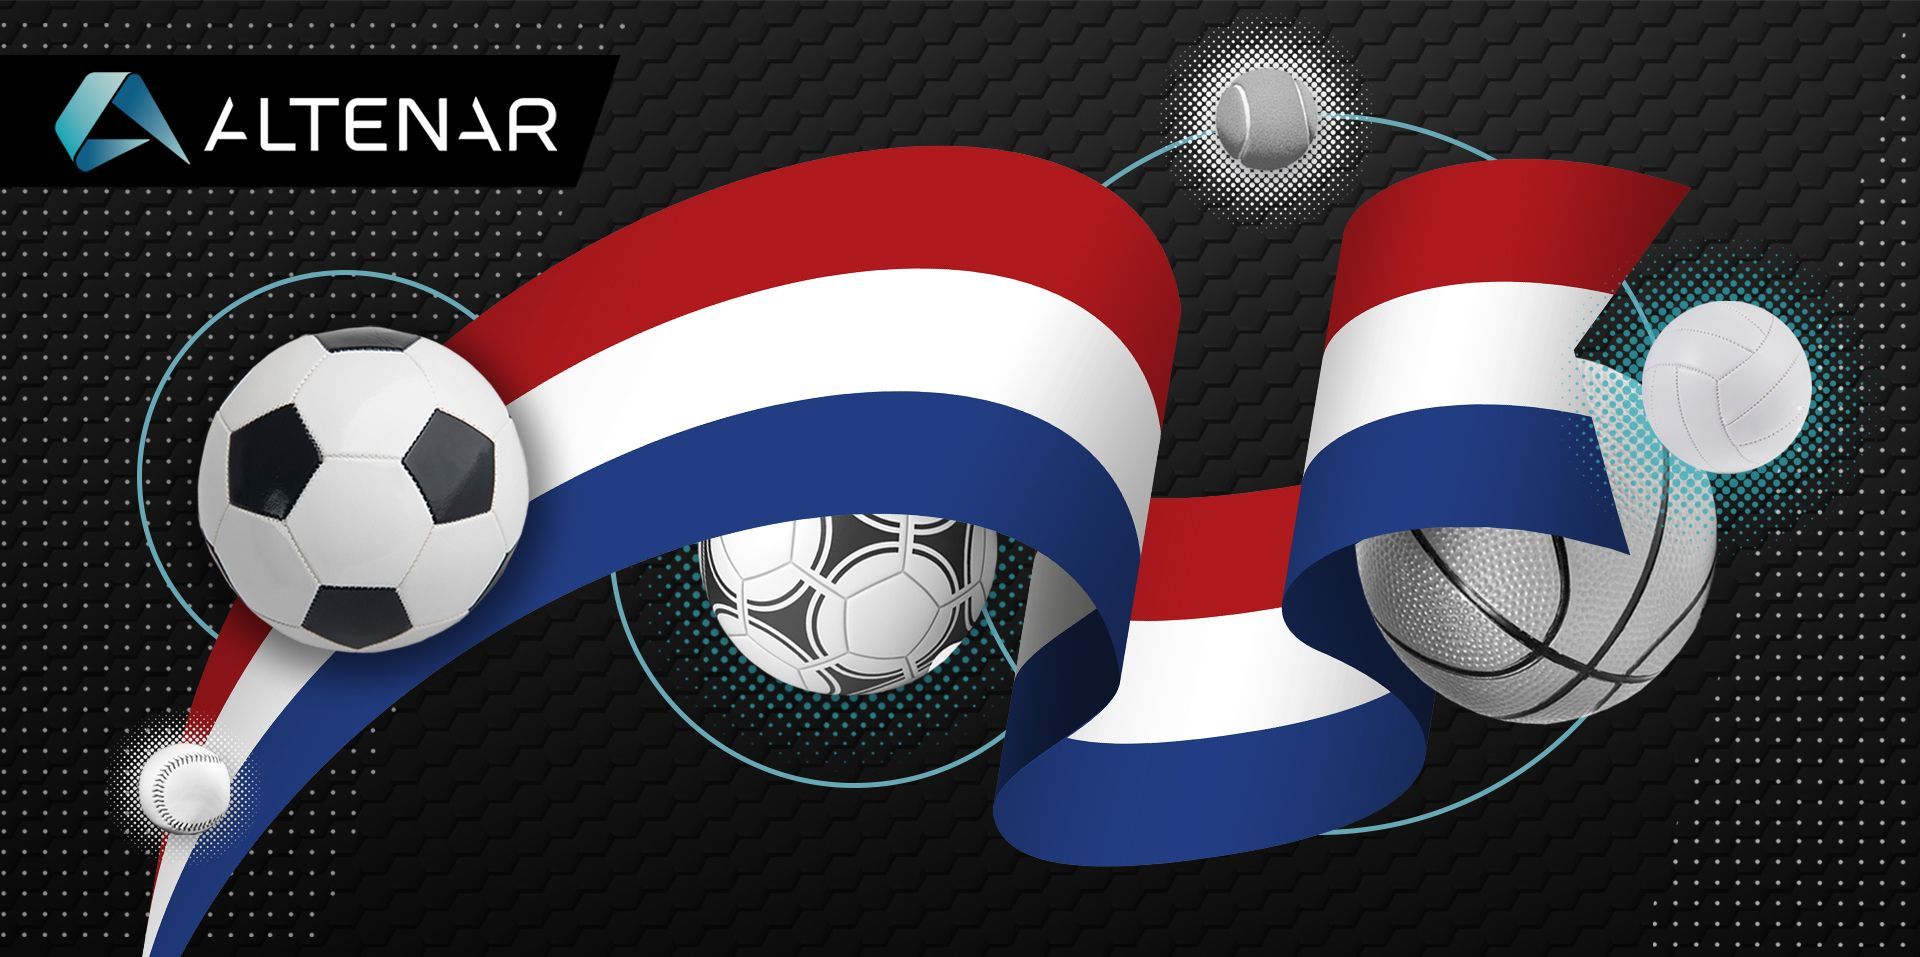 Sports Betting Dominates The Netherlands IGaming Industry According To Altenars Findings 